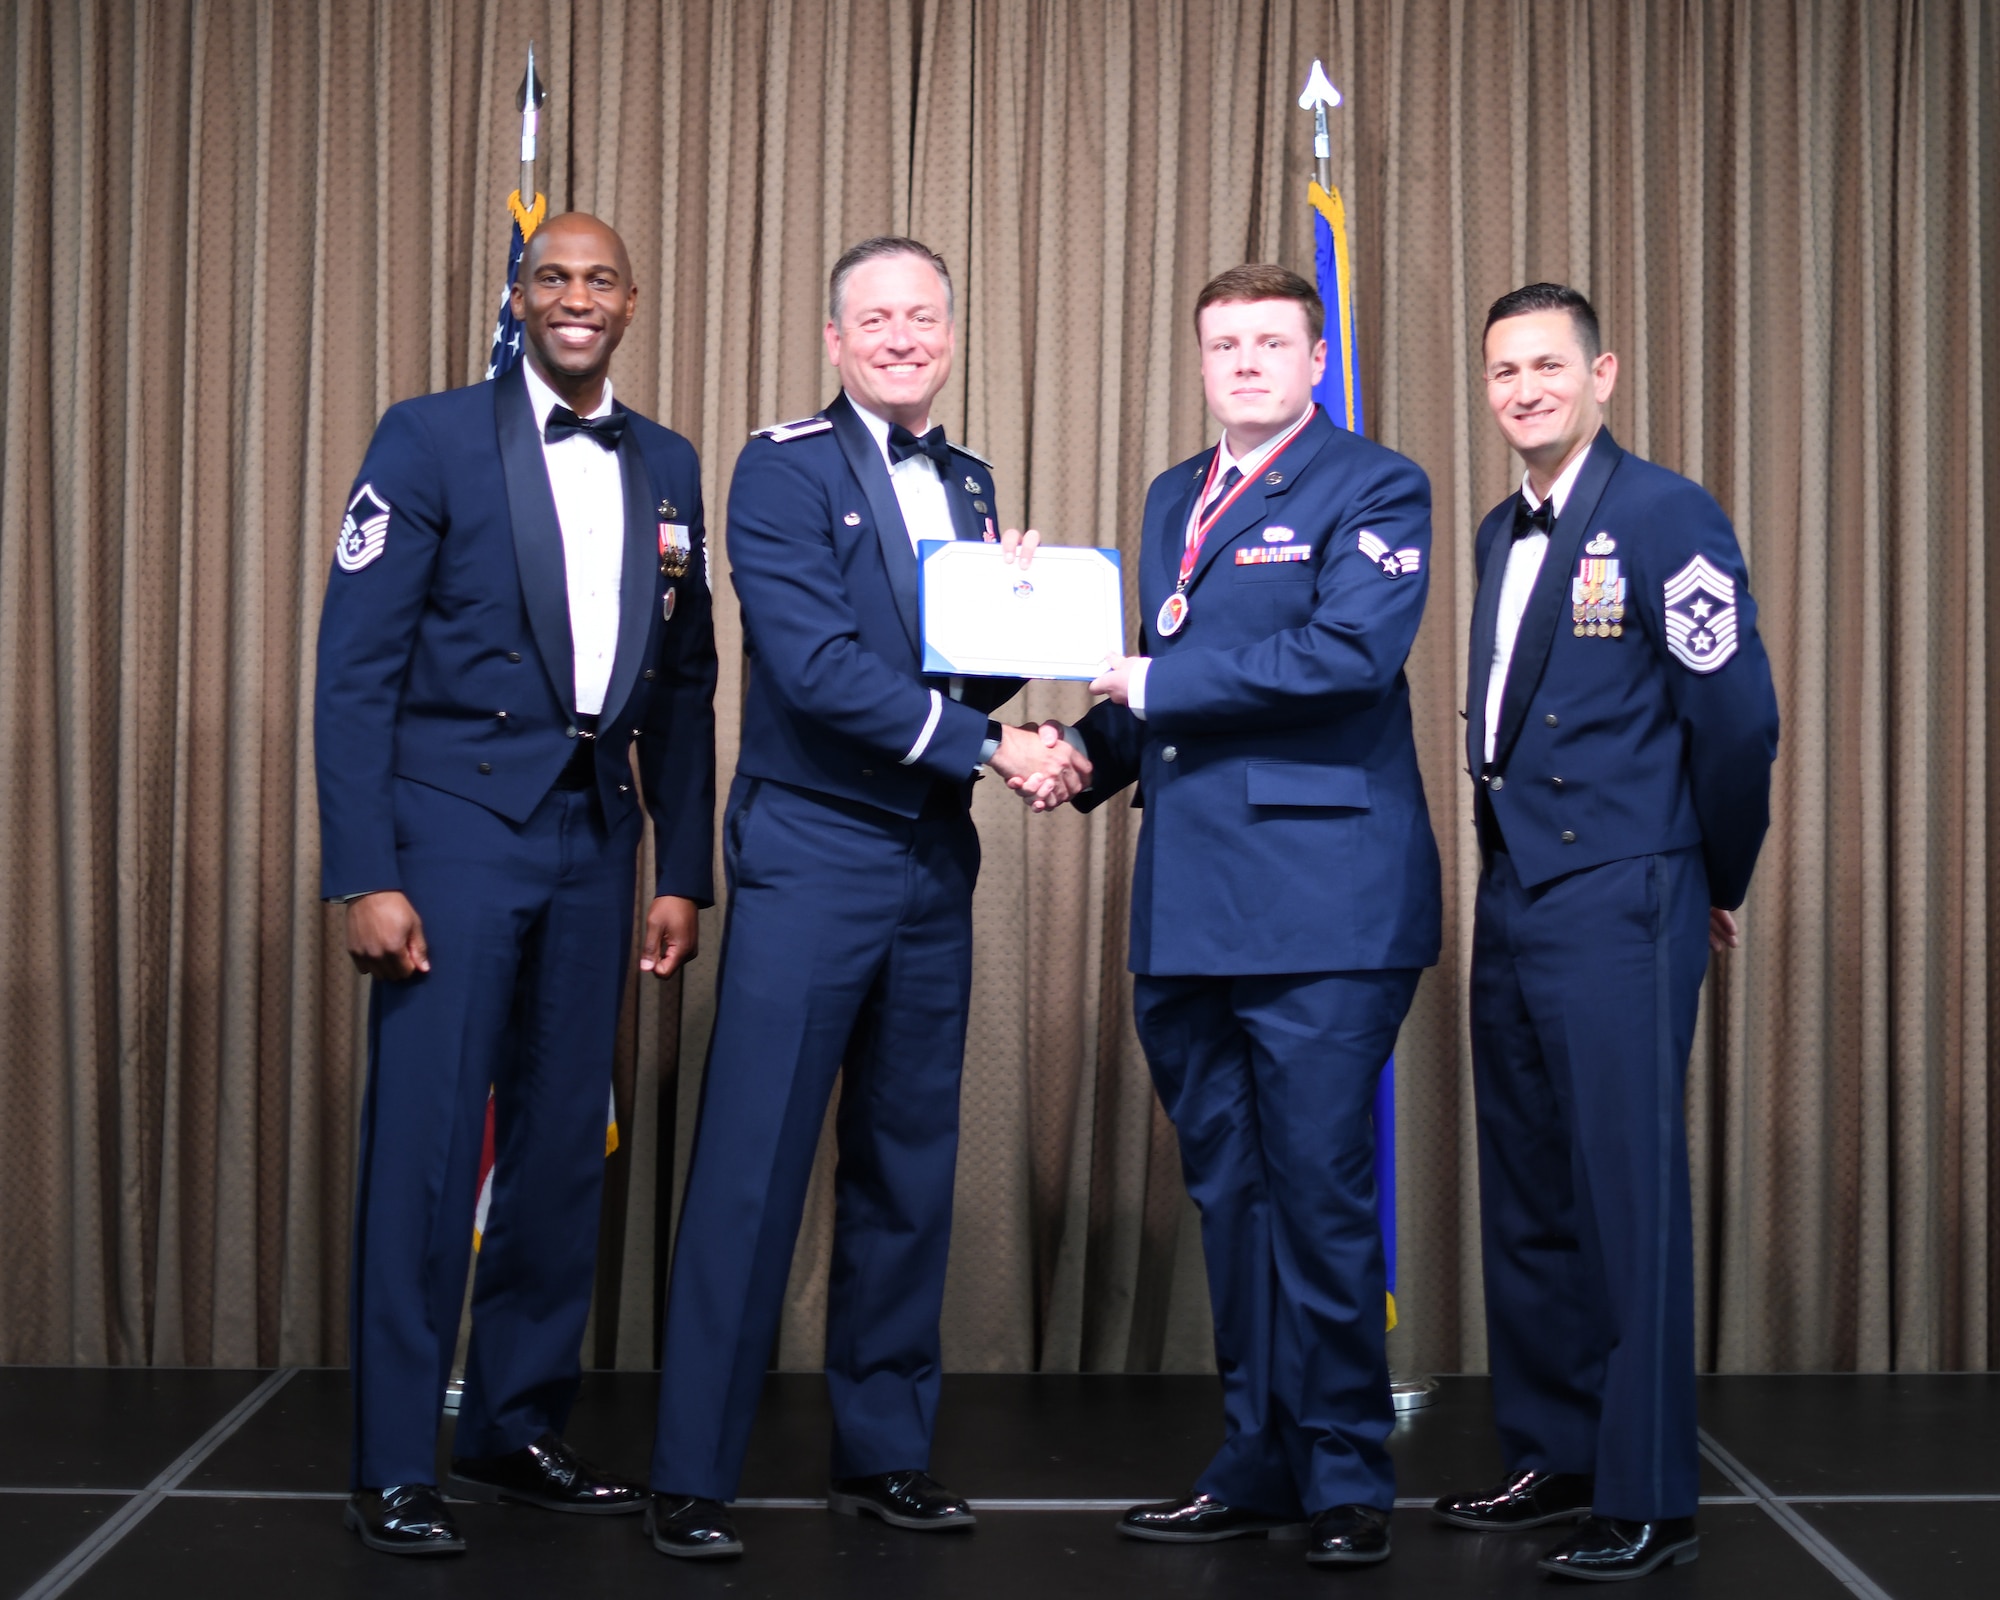 Col. Benjamin Spencer, 319th Air Base Wing commander, presents diploma to SrA Carery Amorine, Etchberger Airman Leadership School graduate, June 20, 2019, on Grand Forks Air Force Base, North Dakota. ALS graduation is the culmination of the first level of the Enlisted Professional Military Education continuum directed toward preparing upcoming noncommissioned officers with leadership skills for their careers. (U.S. Air Force photo by Senior Airman Elijaih Tiggs)